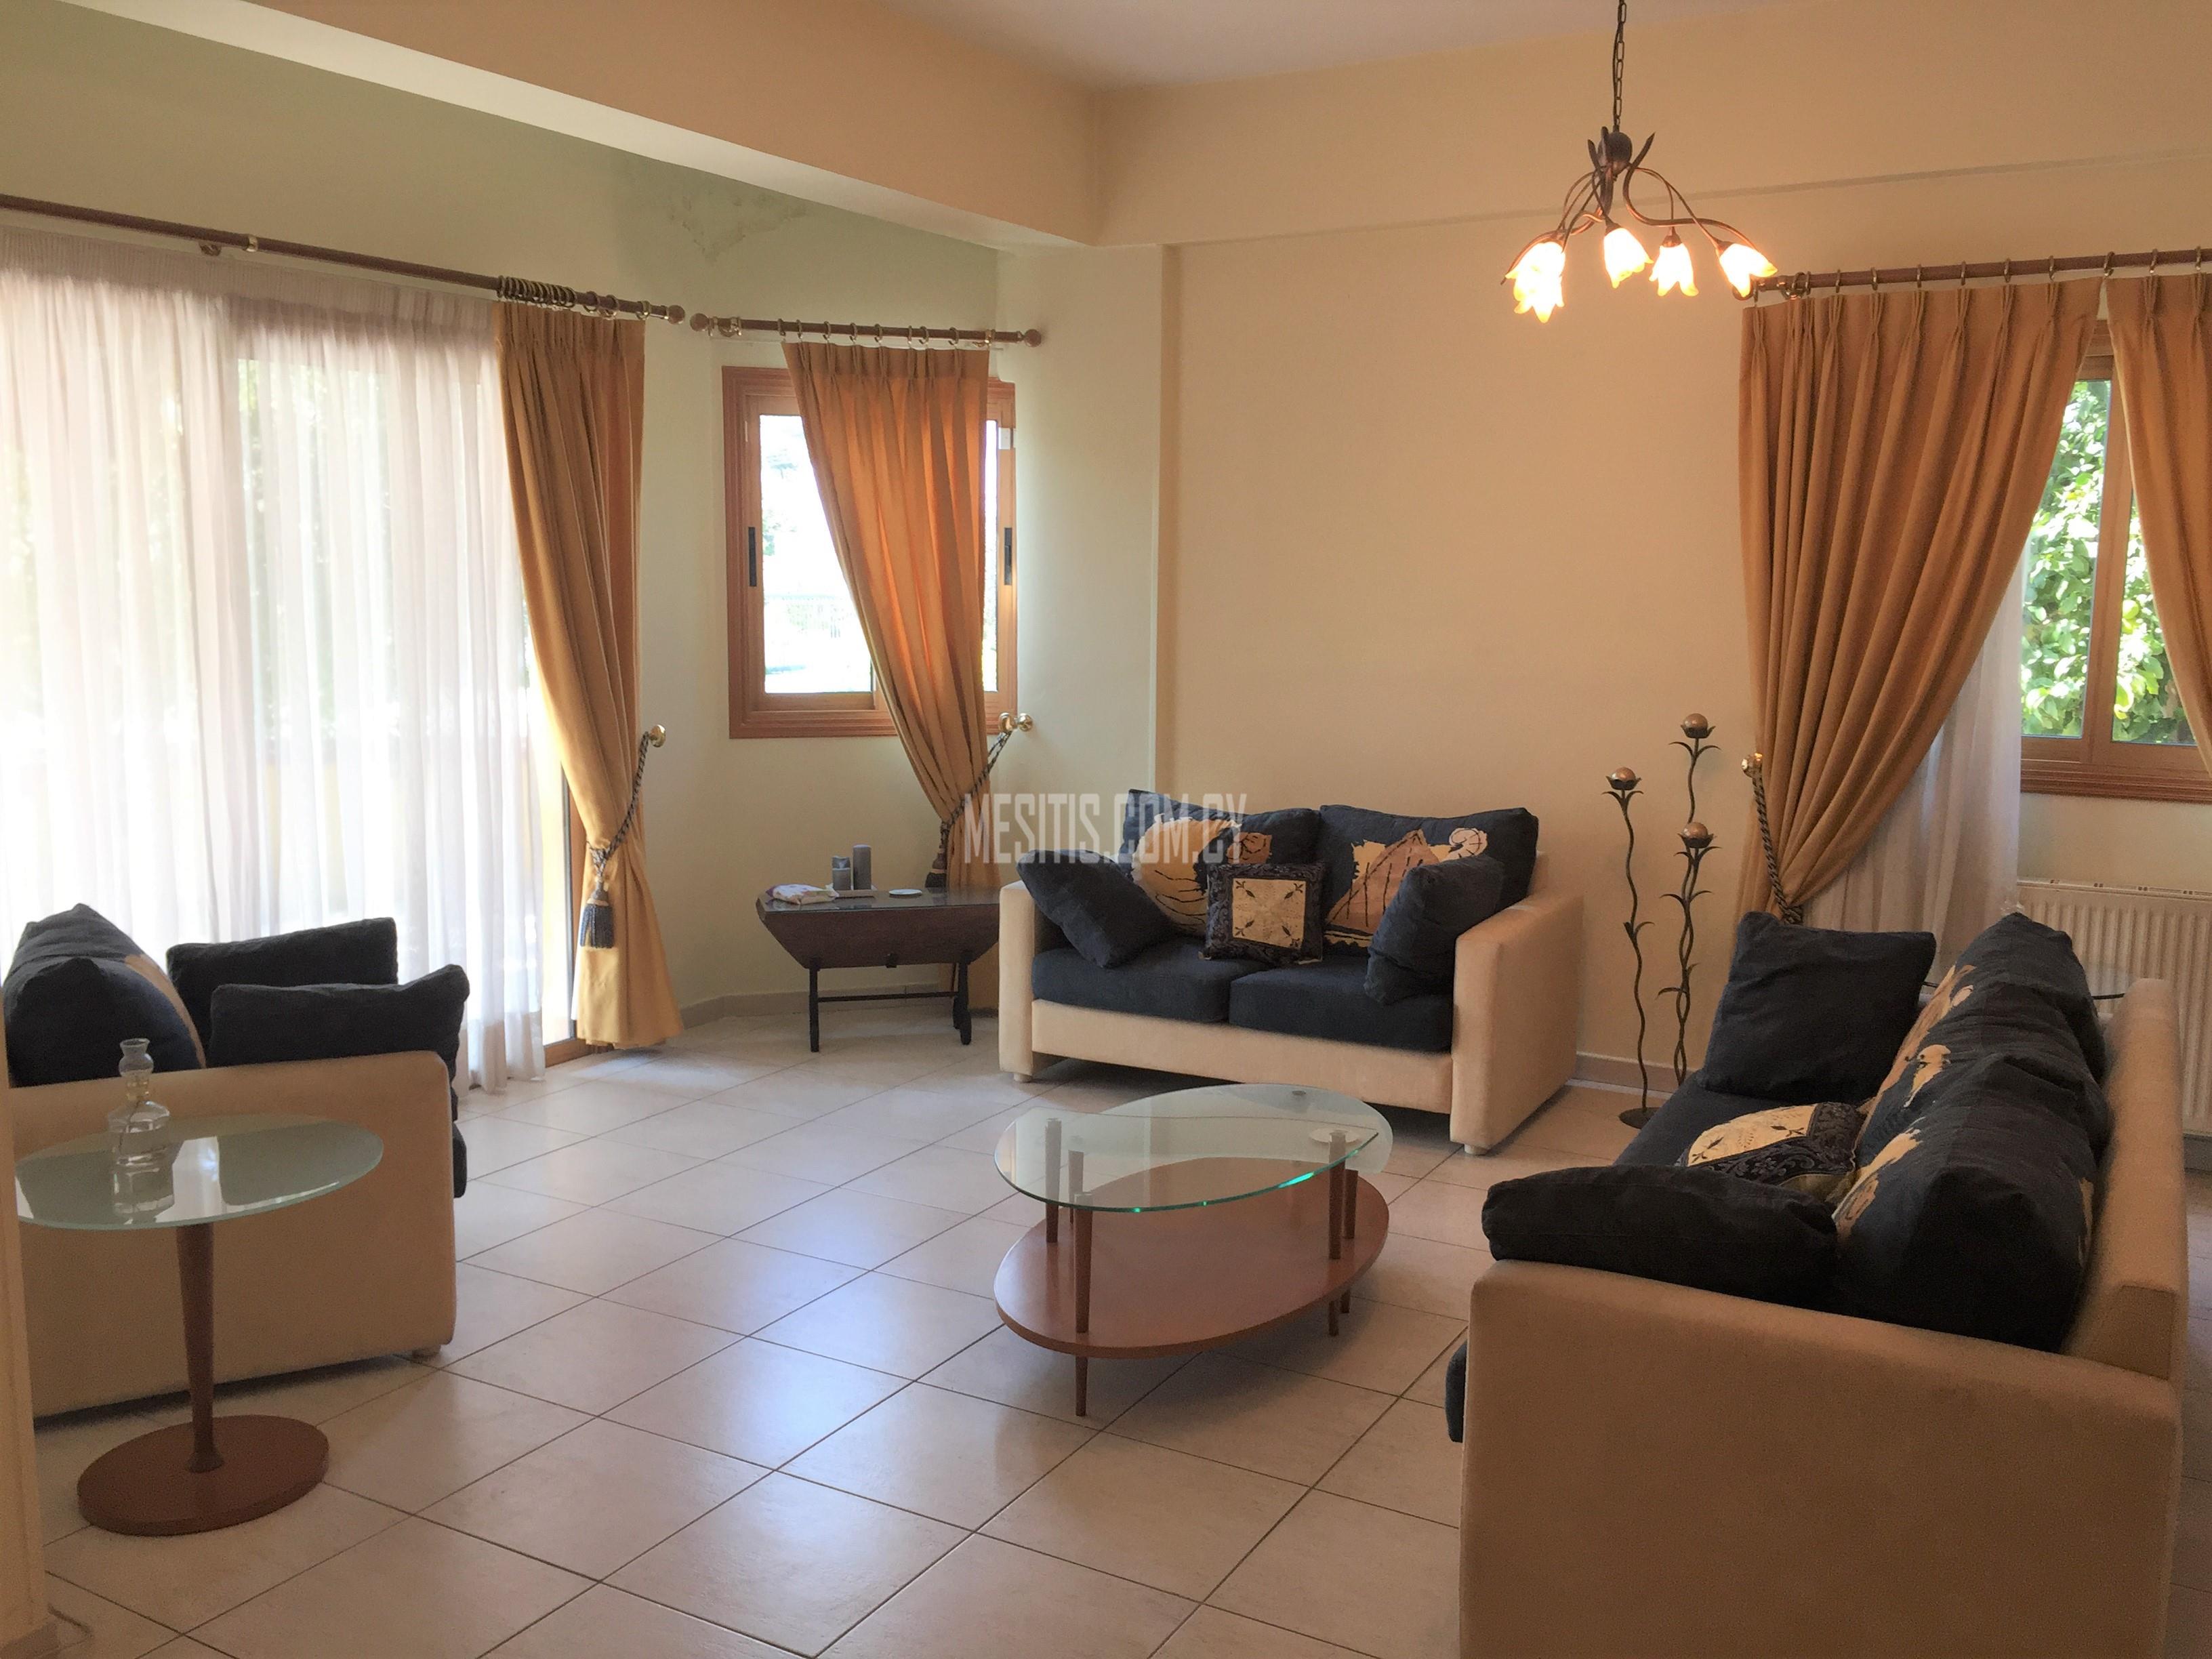 Excellent 3 Bedroom House Semi Furnished For Rent In Lakatameia Near Kfc #3739-0